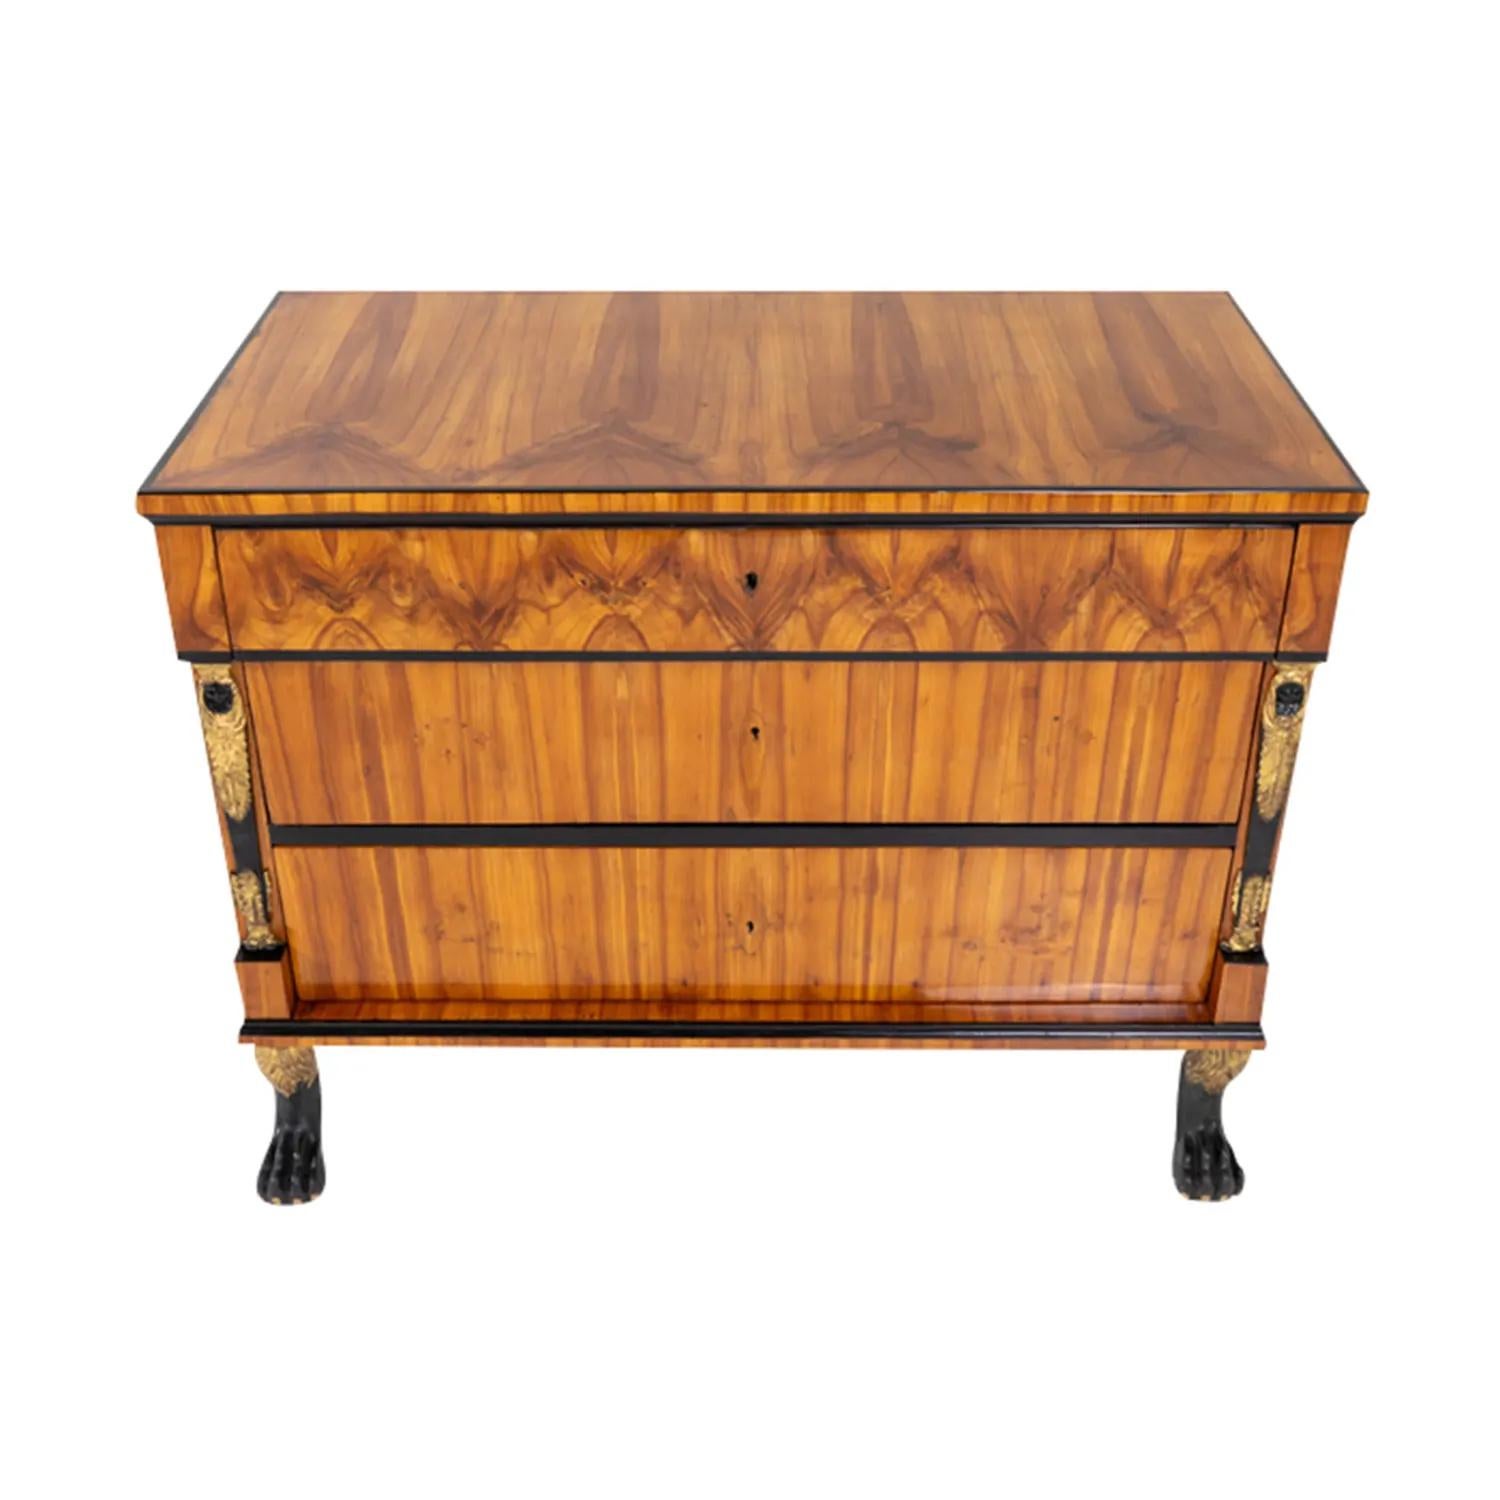 A 19th century, light-brown antique German Biedermeier chest, commode made of handcrafted Cherrywood, shellac polished and partly veneered in good condition. The cupboard is composed with two large and one small drawer, consisting its original